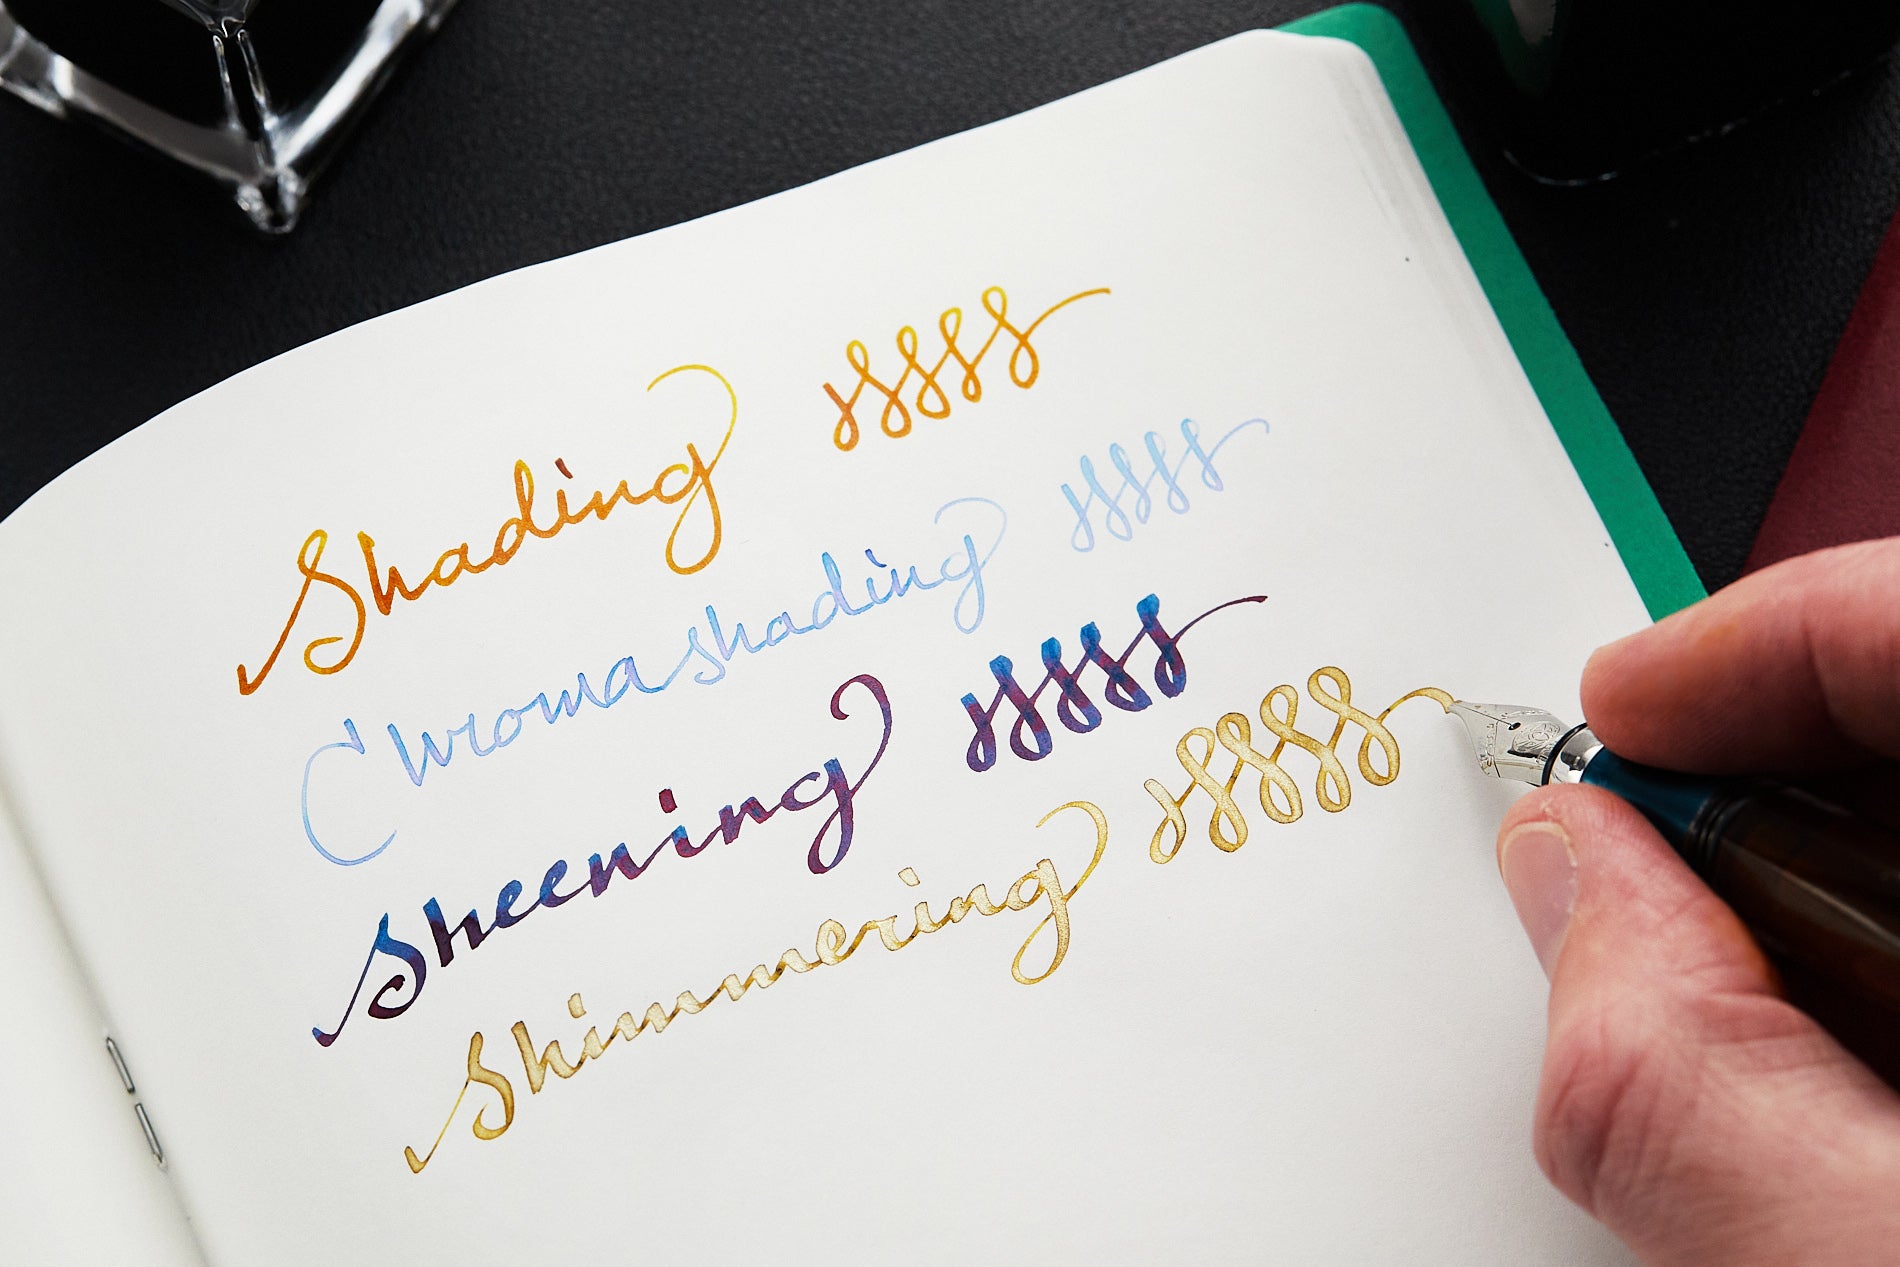 Writing with various fountain pen inks